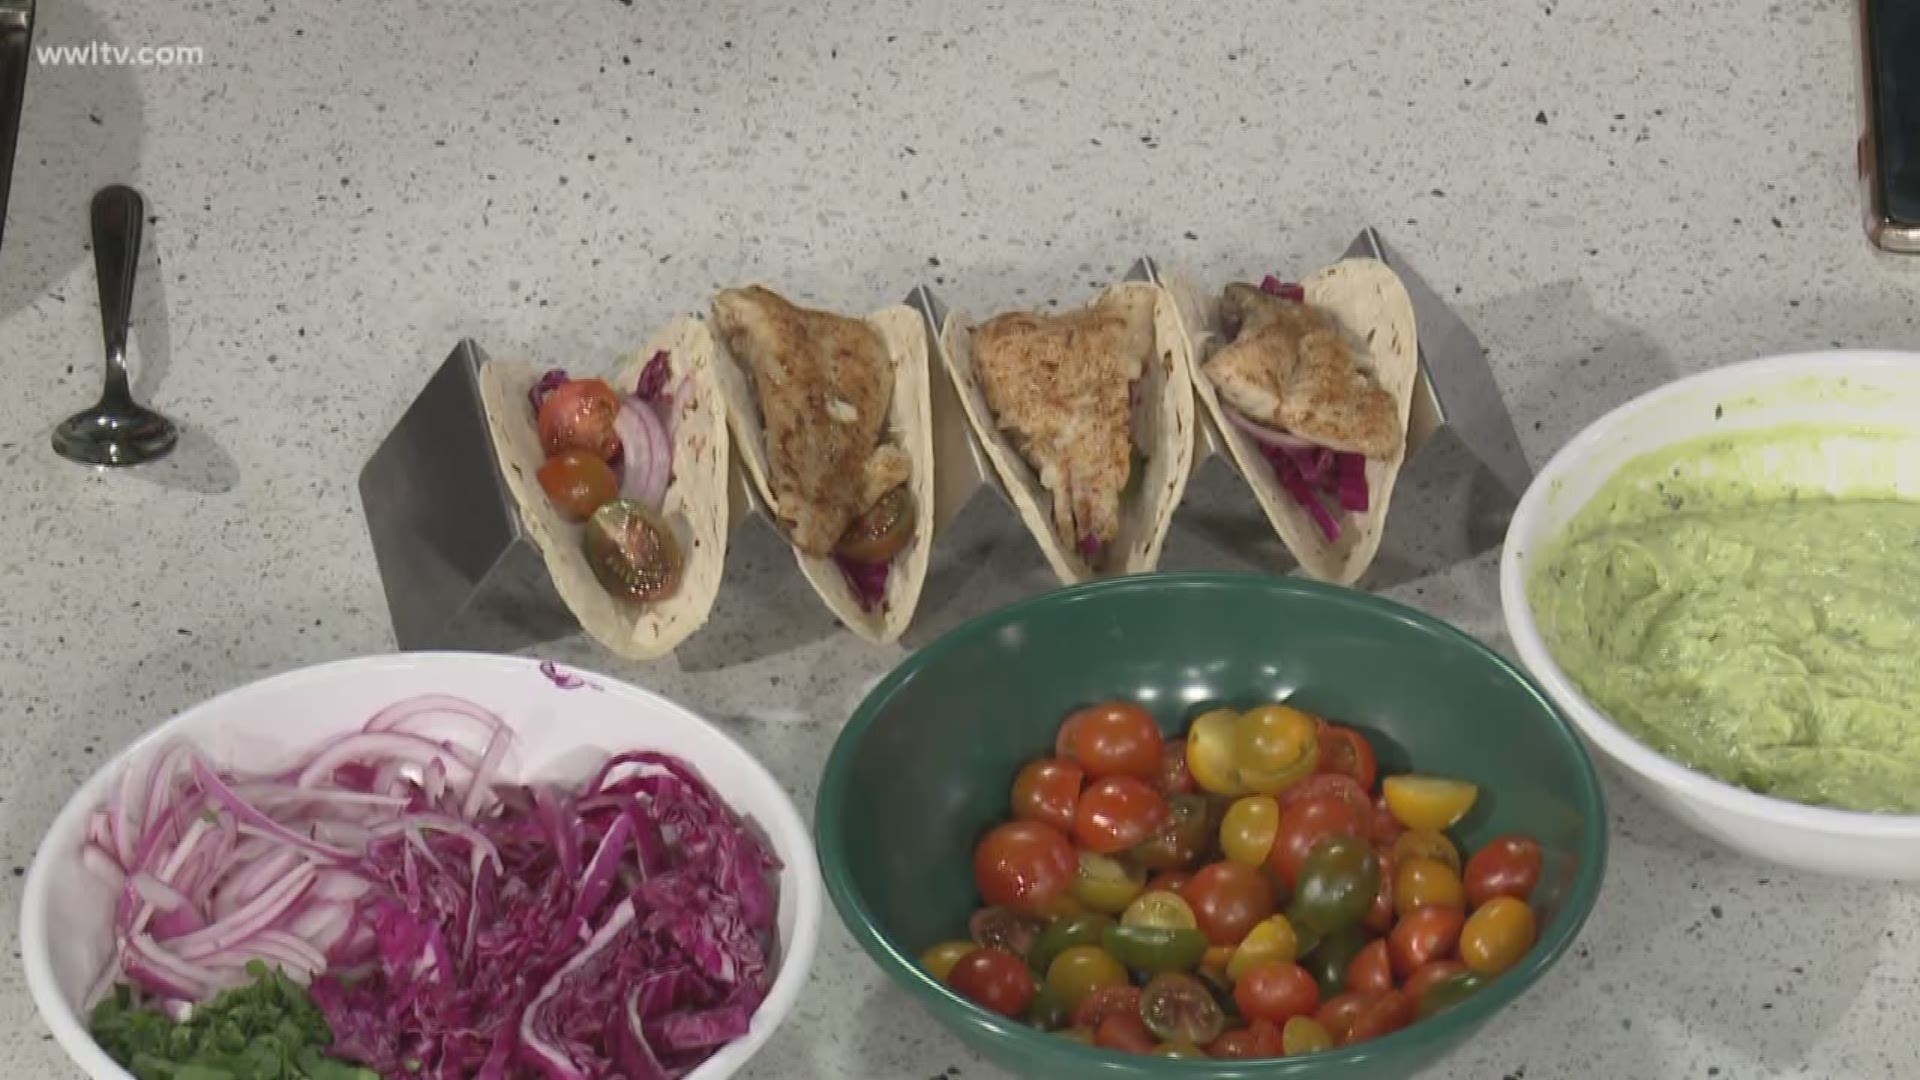 Chef Kevin Belton's fish tacos and creamy avocado sauce